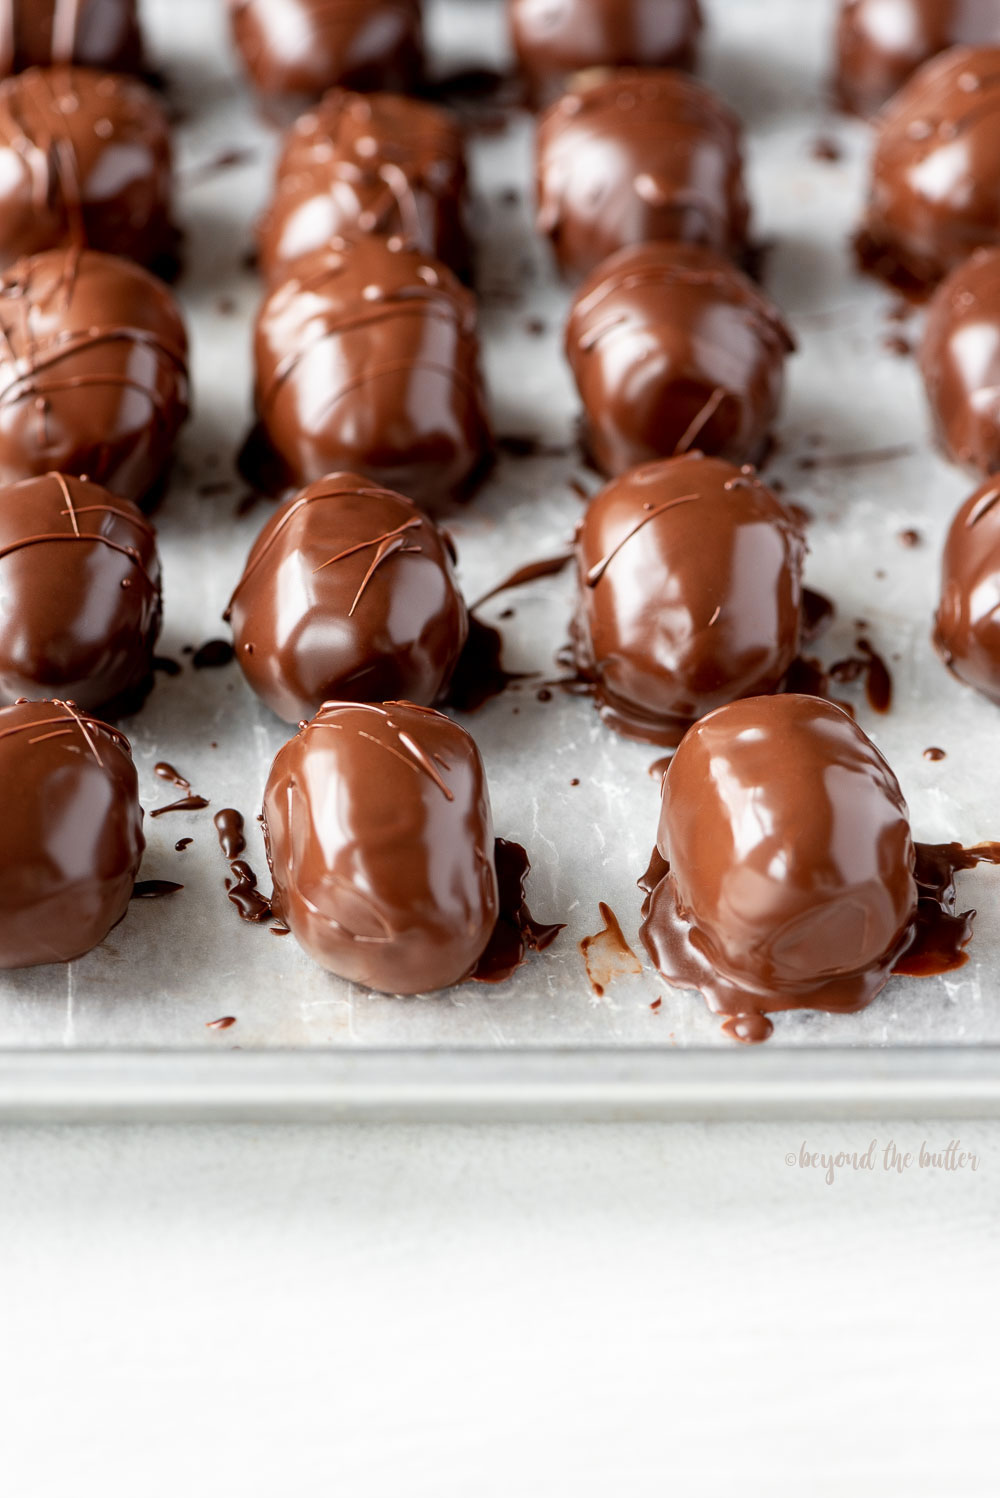 Angled photo chocolate covered peanut butter eggs on a baking sheet | Image and Copyright Policy: © Beyond the Butter, LLC